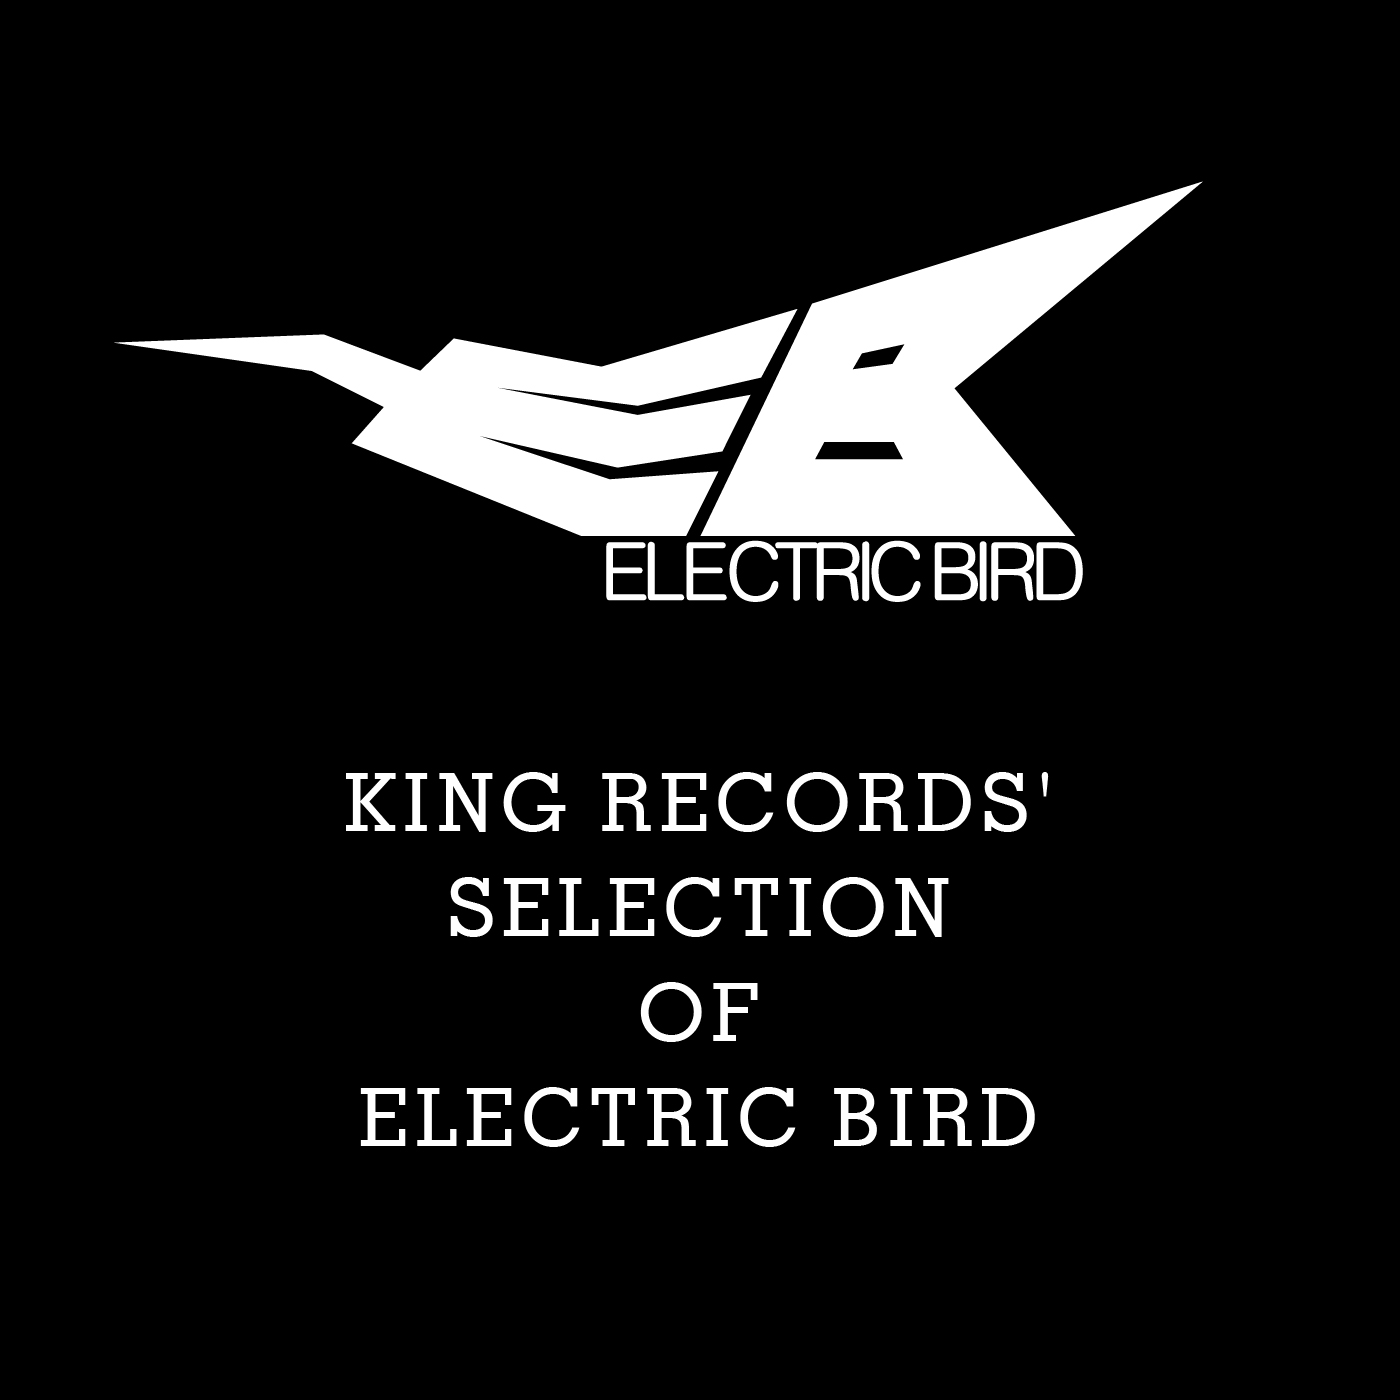 ELECTRIC BIRD PLAYLIST BY KING RECORDS